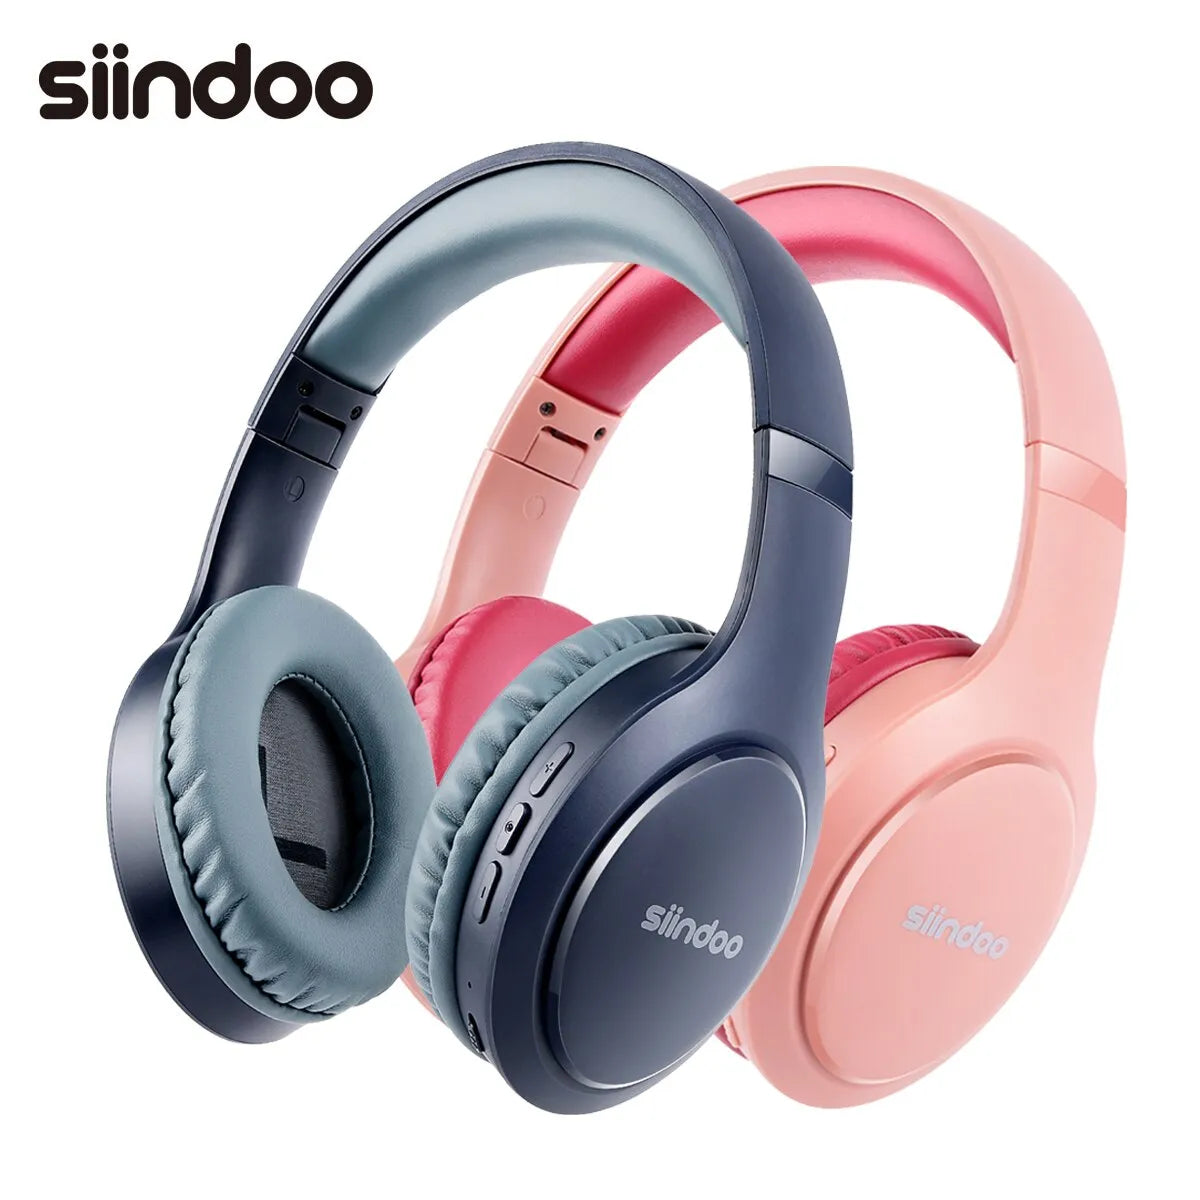 Siindoo JH-919 Wireless Bluetooth Headphones Pink&Blue Foldable Stereo Earphones Super Bass Noise Cancelling Mic For Laptop TV